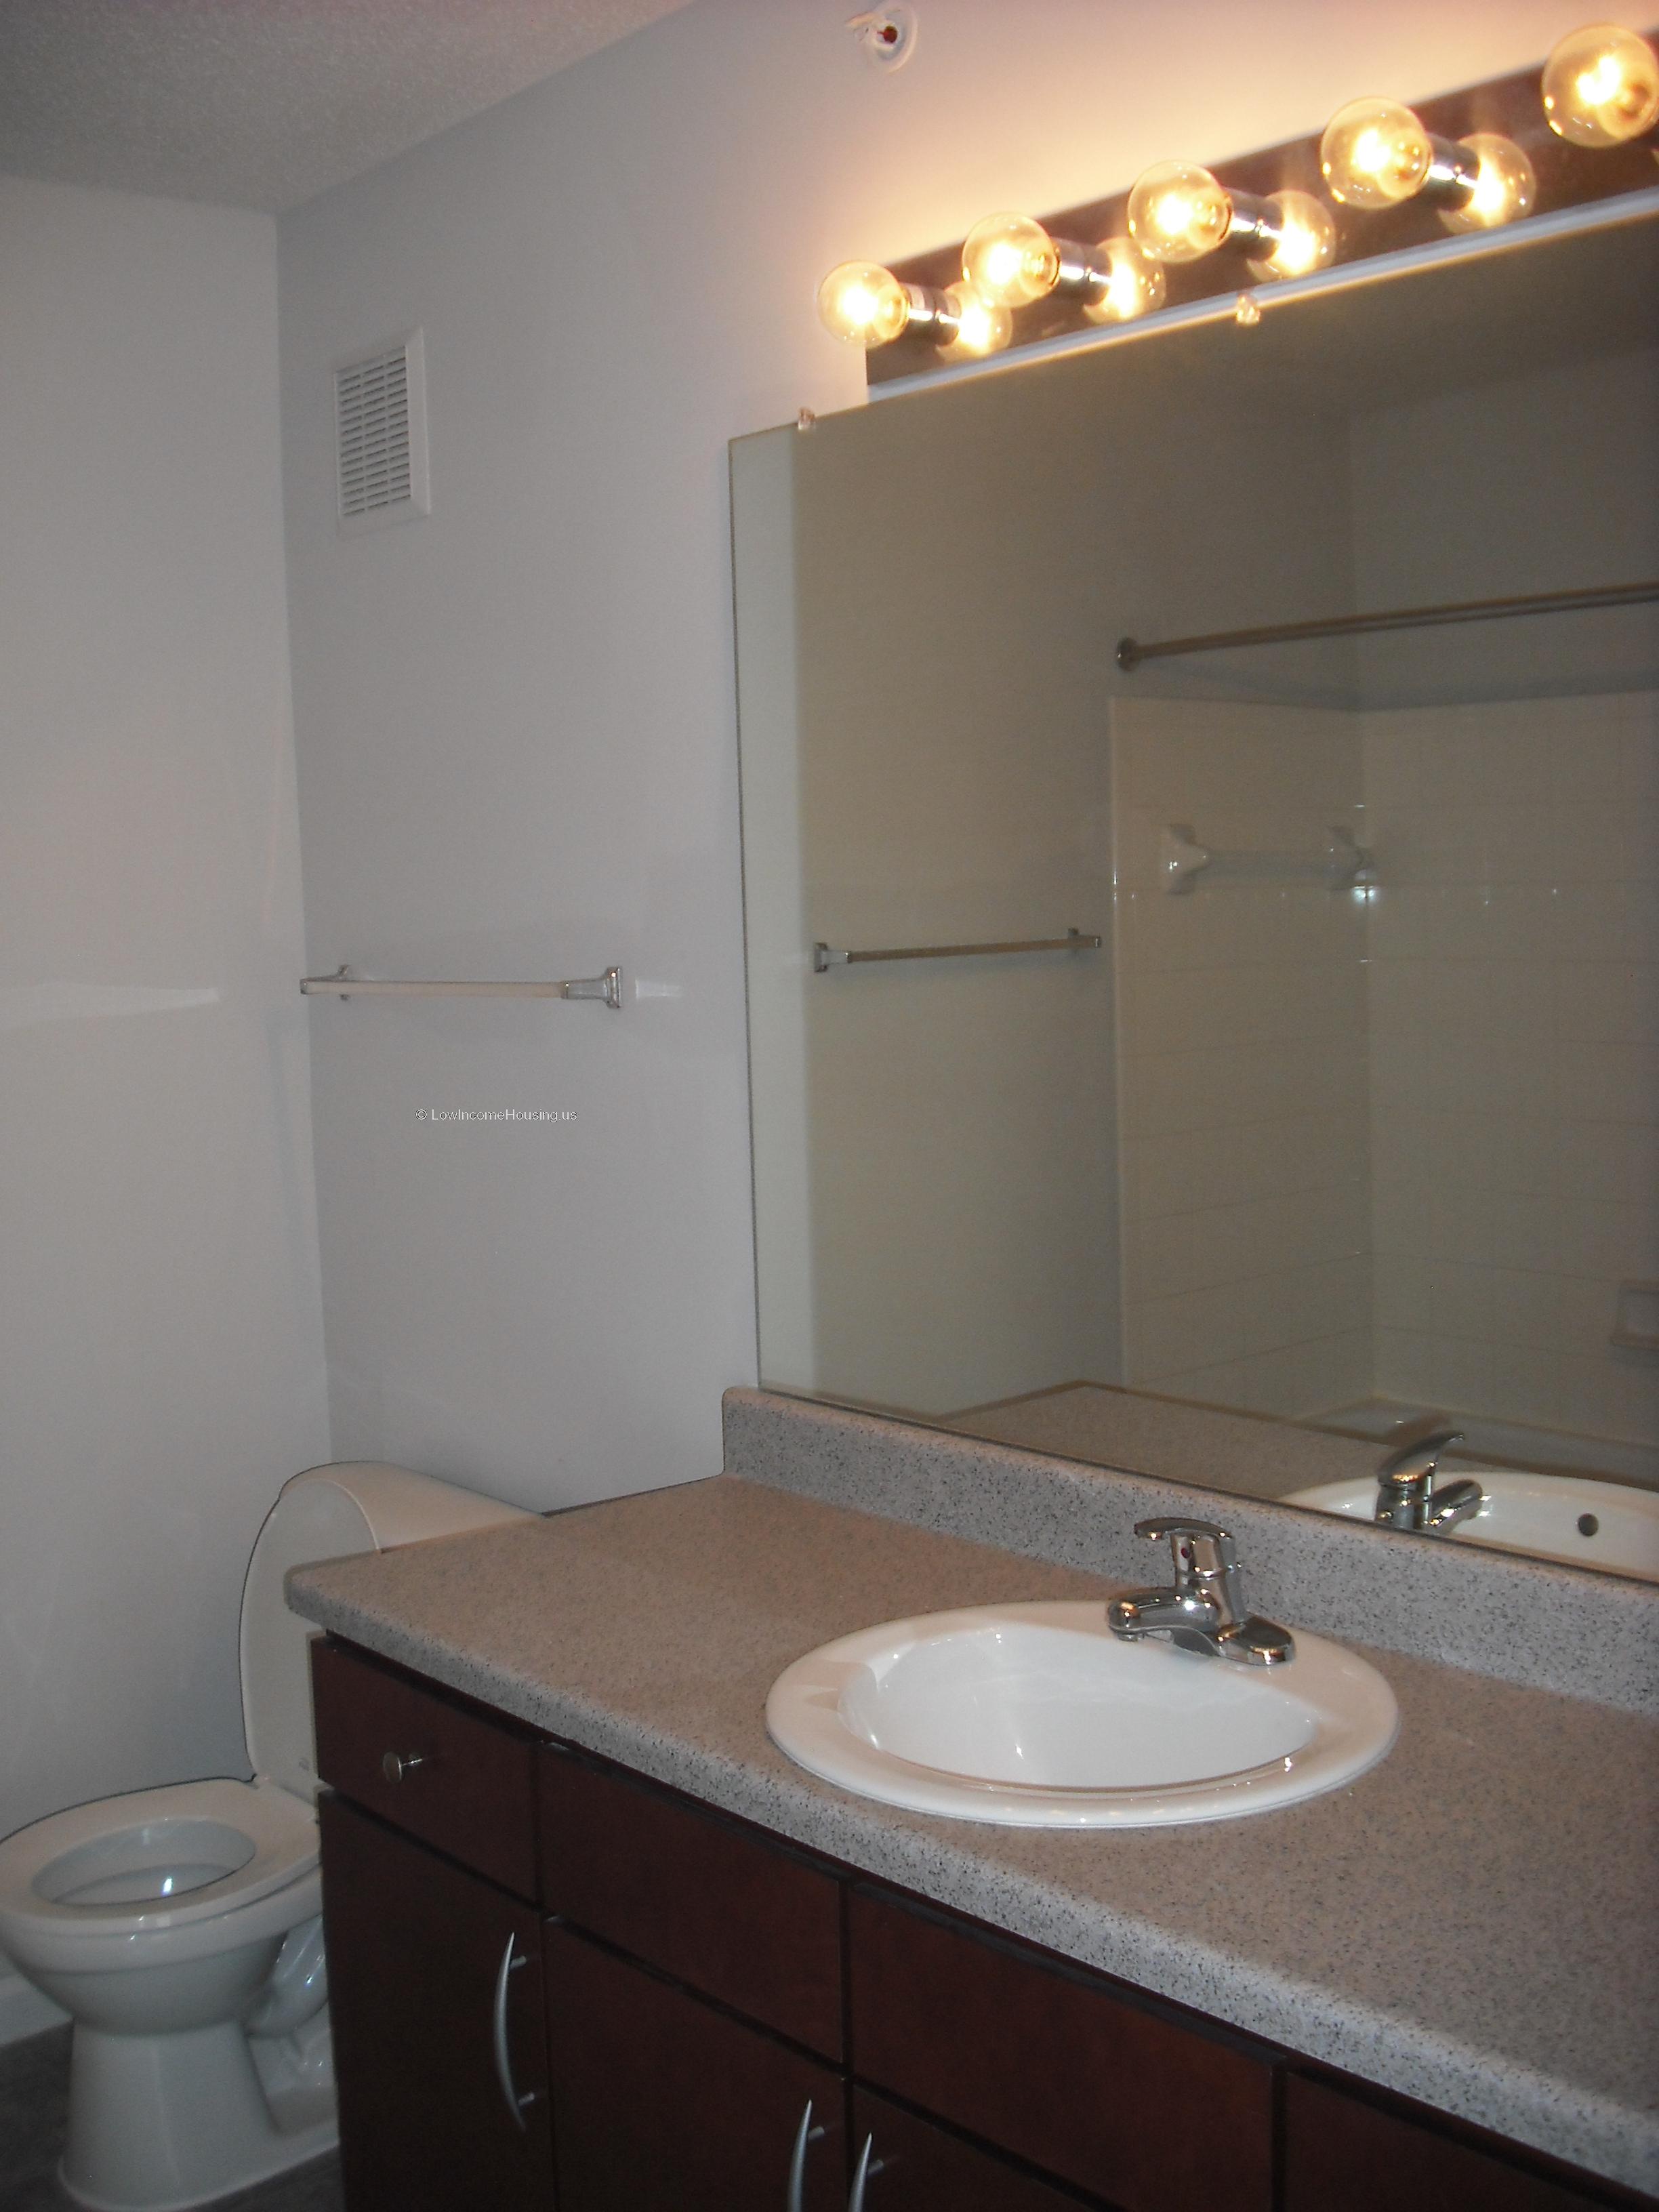 Interior view of toilet wash basin, shower stall, sink 